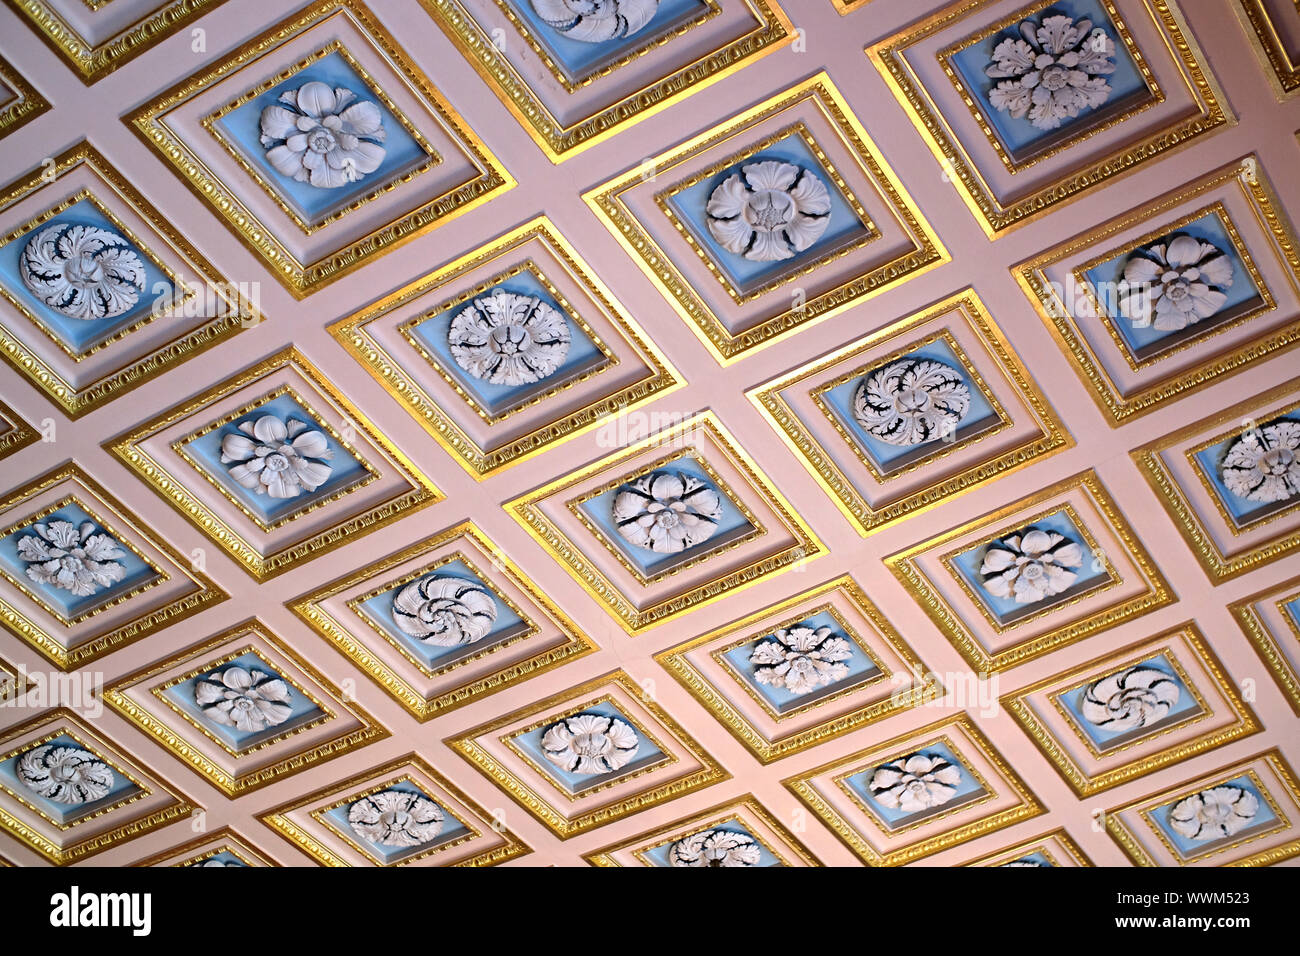 Ornate ceiling in an English country house Stock Photo